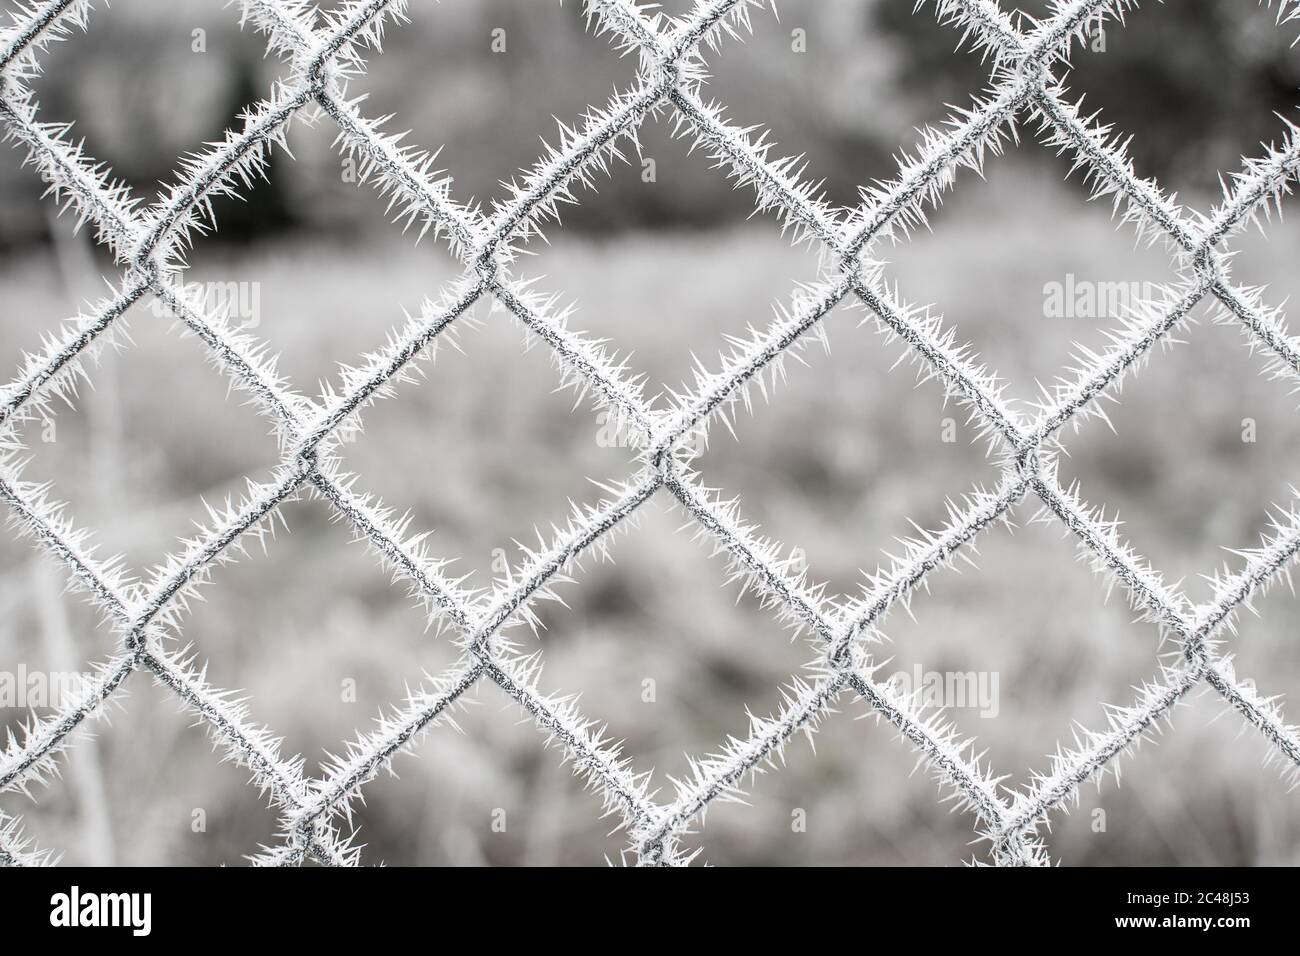 Frozen fence close-up covered by snow and ice artifacts. Winter photography Stock Photo